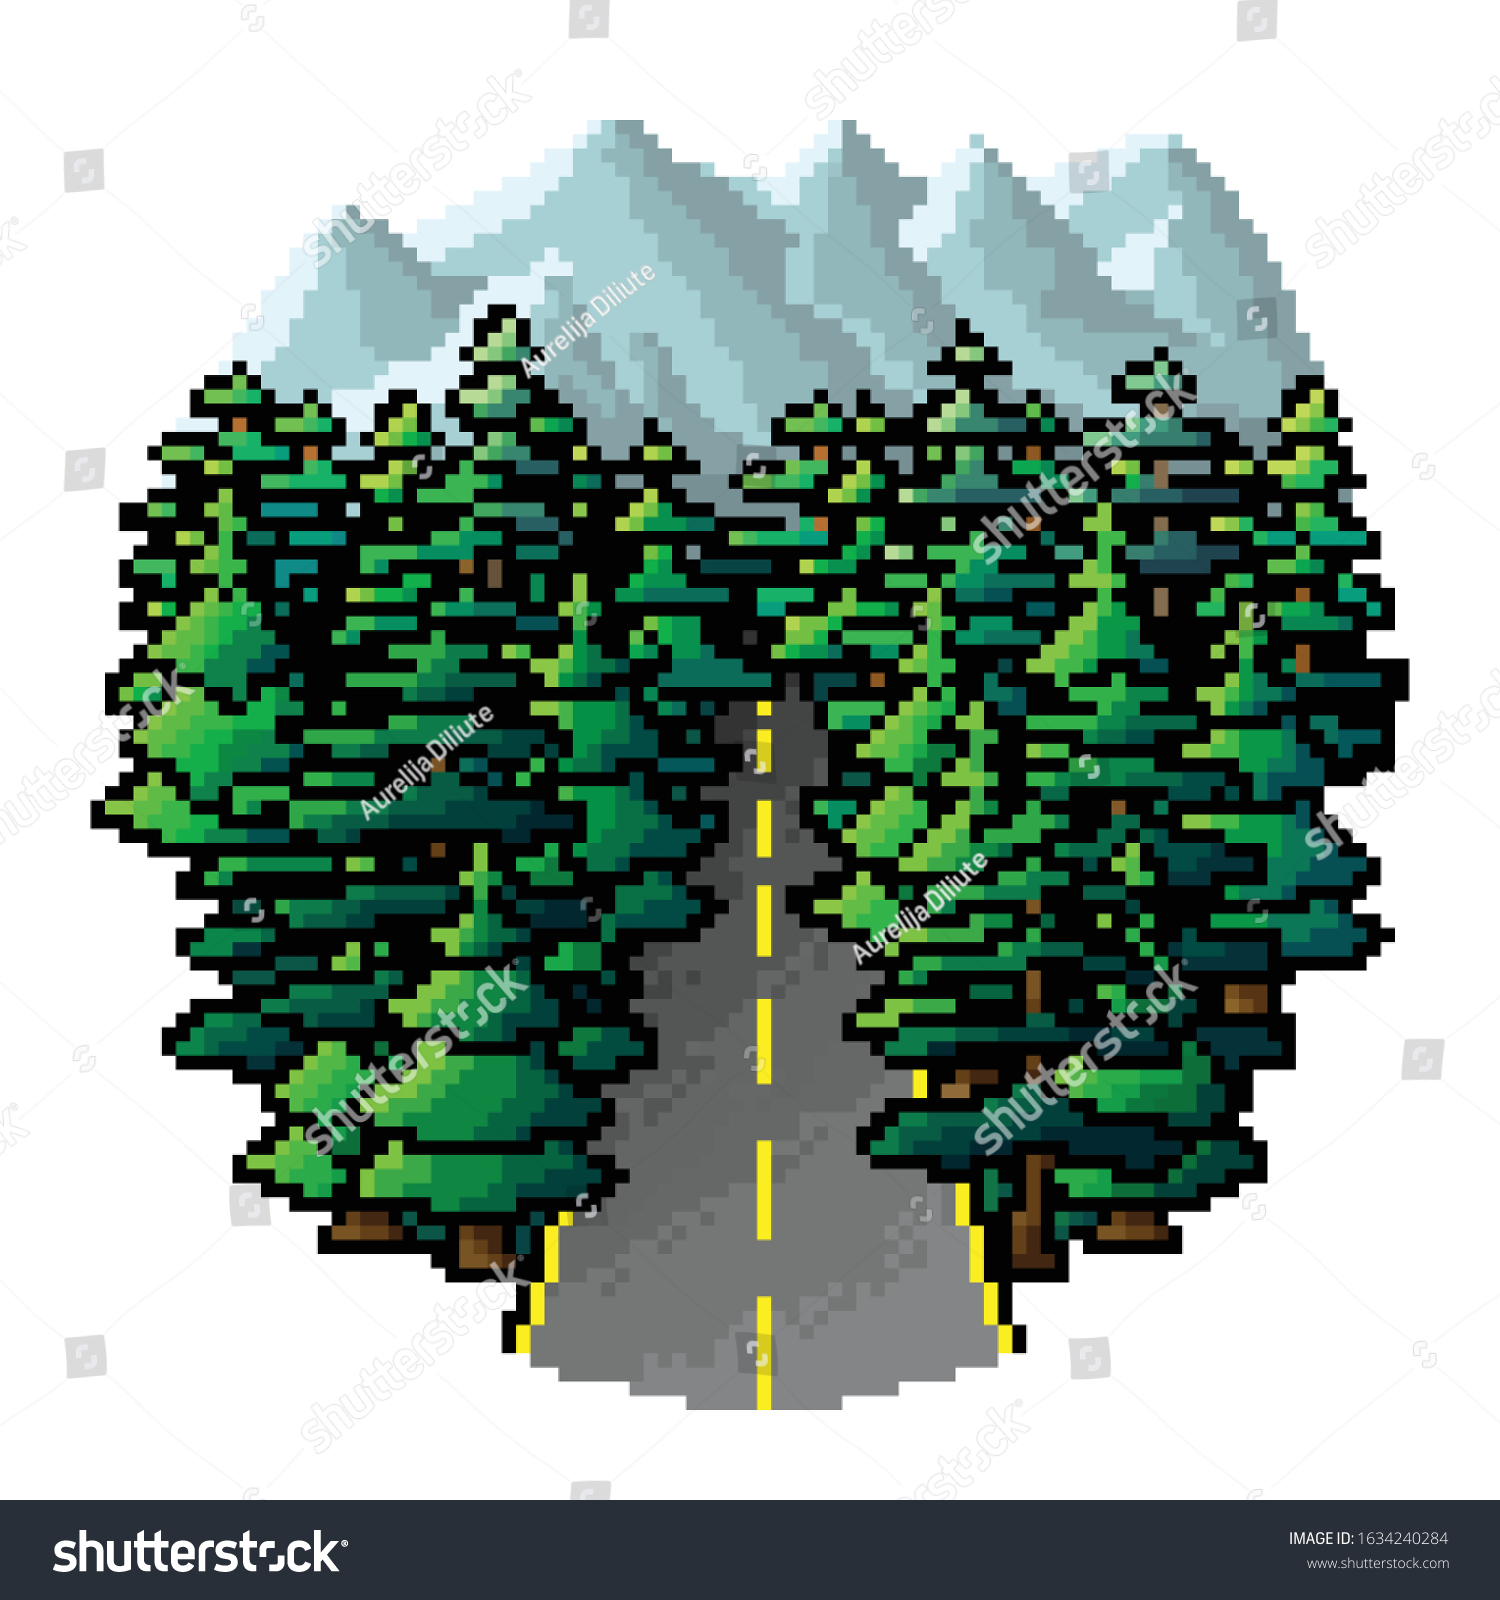 Pixel Art Forest And Mountain Landscape Vector Illustration Pixel Road Thro...